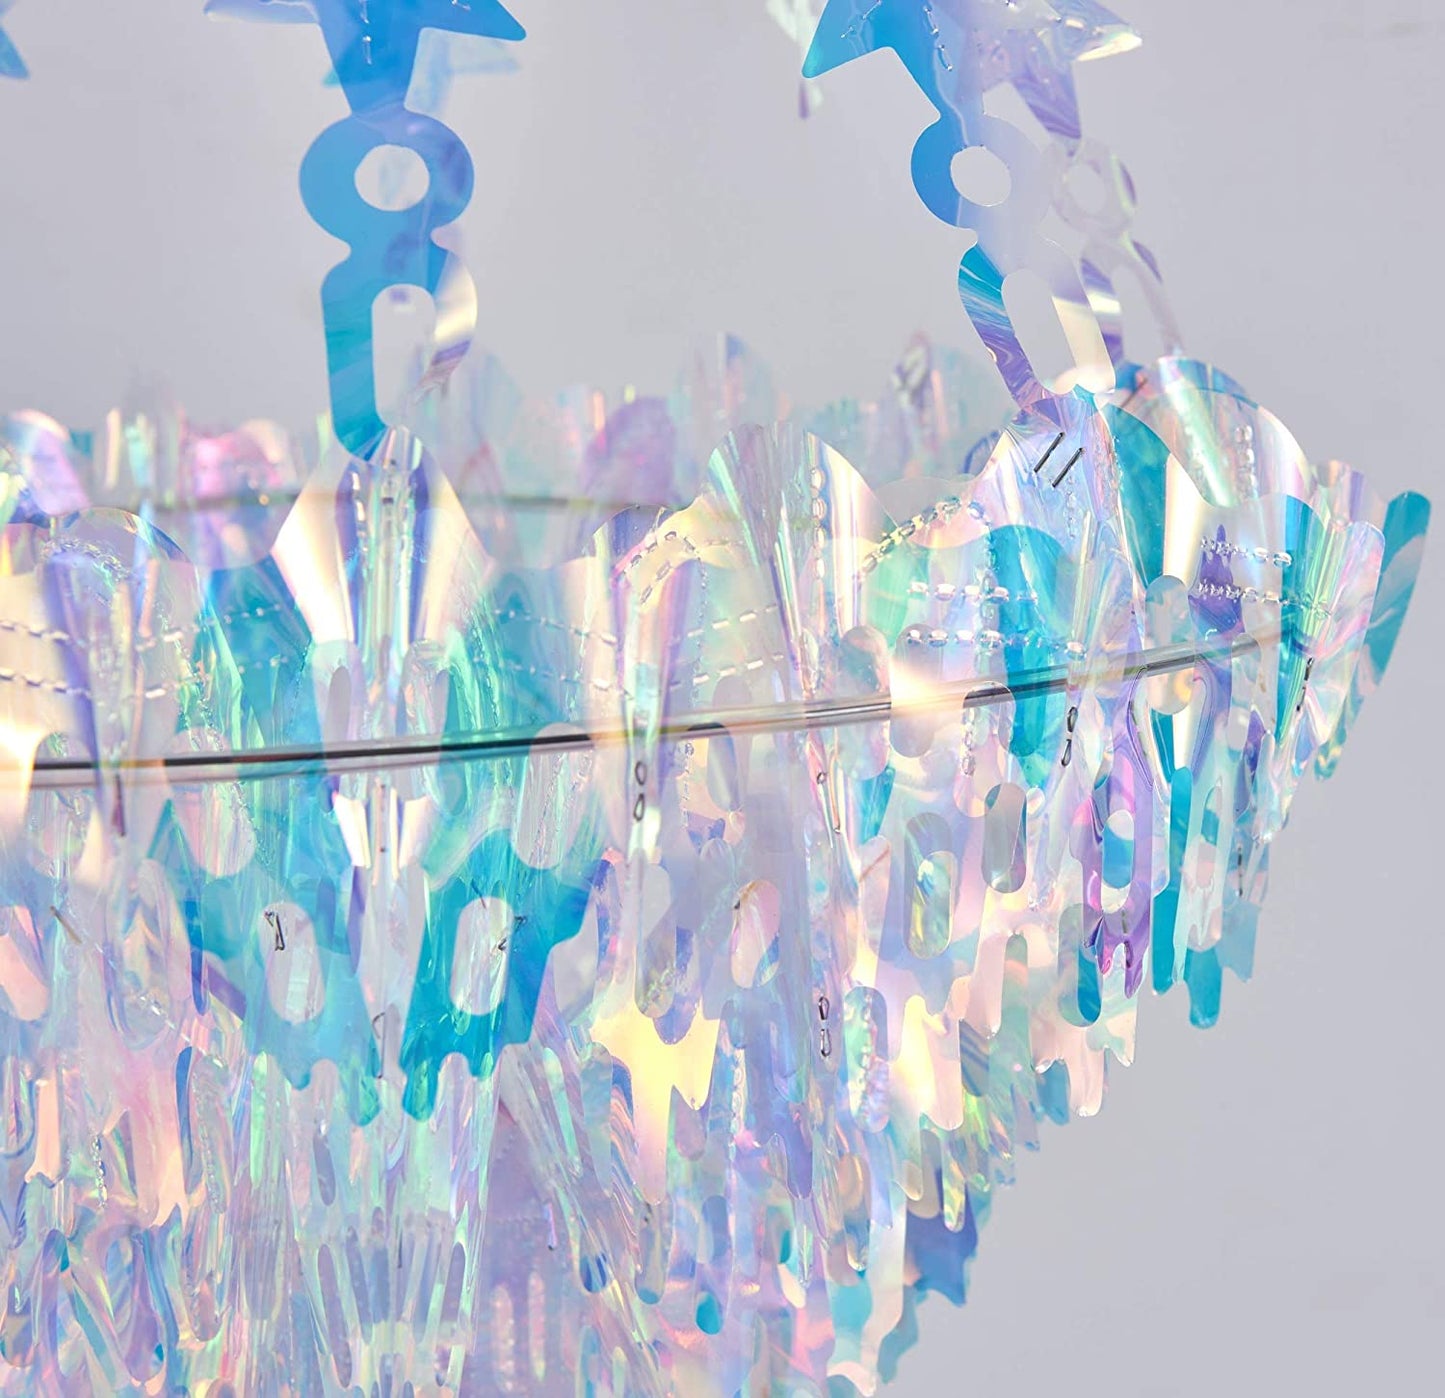 Hanging Decorations Iridescent Chandelier Shaped Foil Ceiling Hanging Ornament for Bridal Shower Wedding Birthday Frozen Theme Party Fairy Princess Rainbow Show Decoration